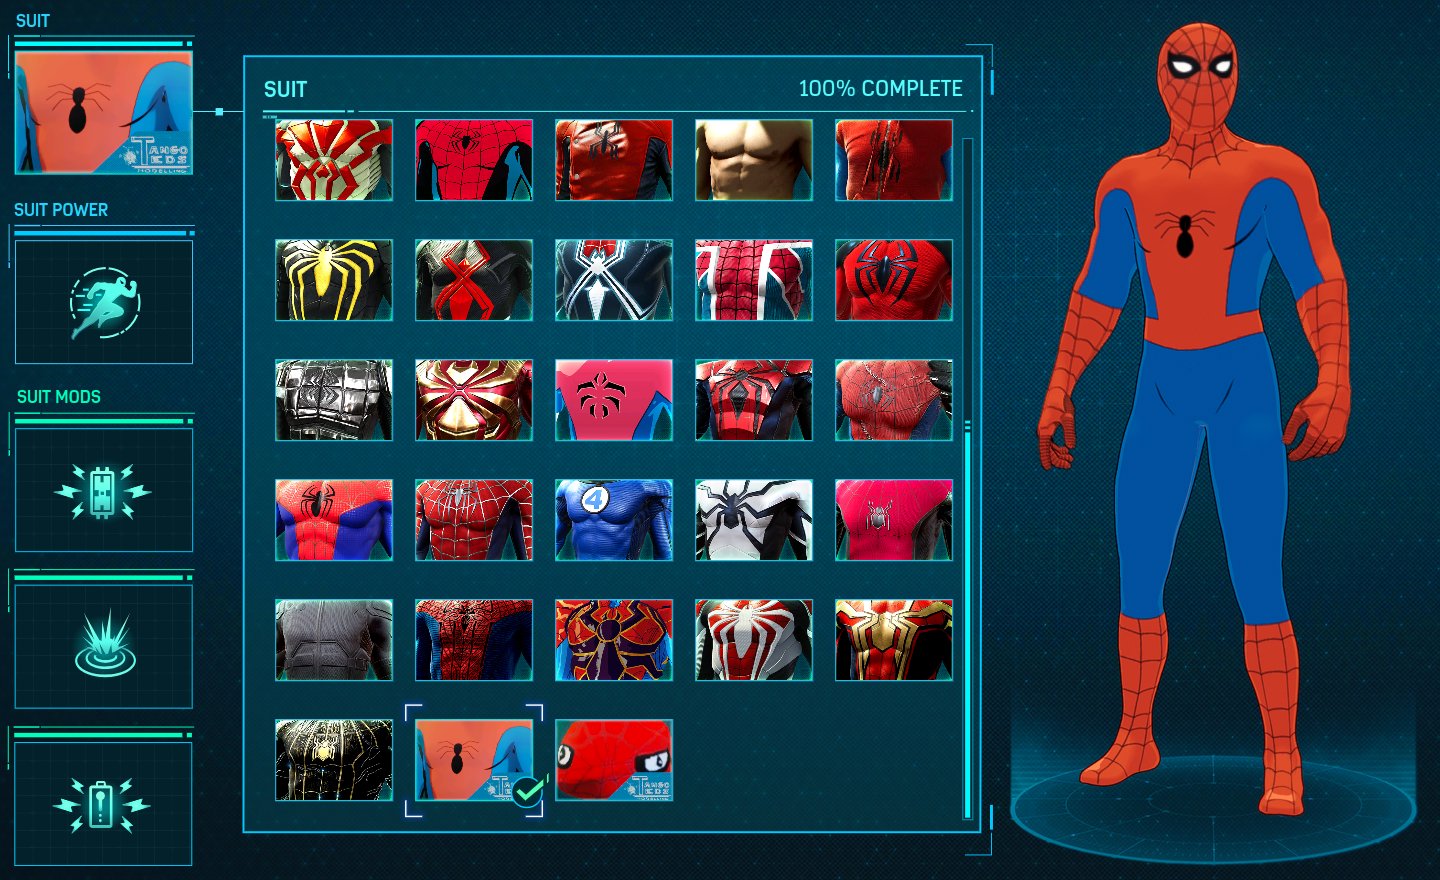 TangoTeds on Twitter: "AVAILABLE NOW! The 1968 Animated for Spider-Man Remastered Only on NexusMods! #SpiderManPC #SpiderMan https://t.co/93lIzTKI6s https://t.co/0ynai9Ldgi" /